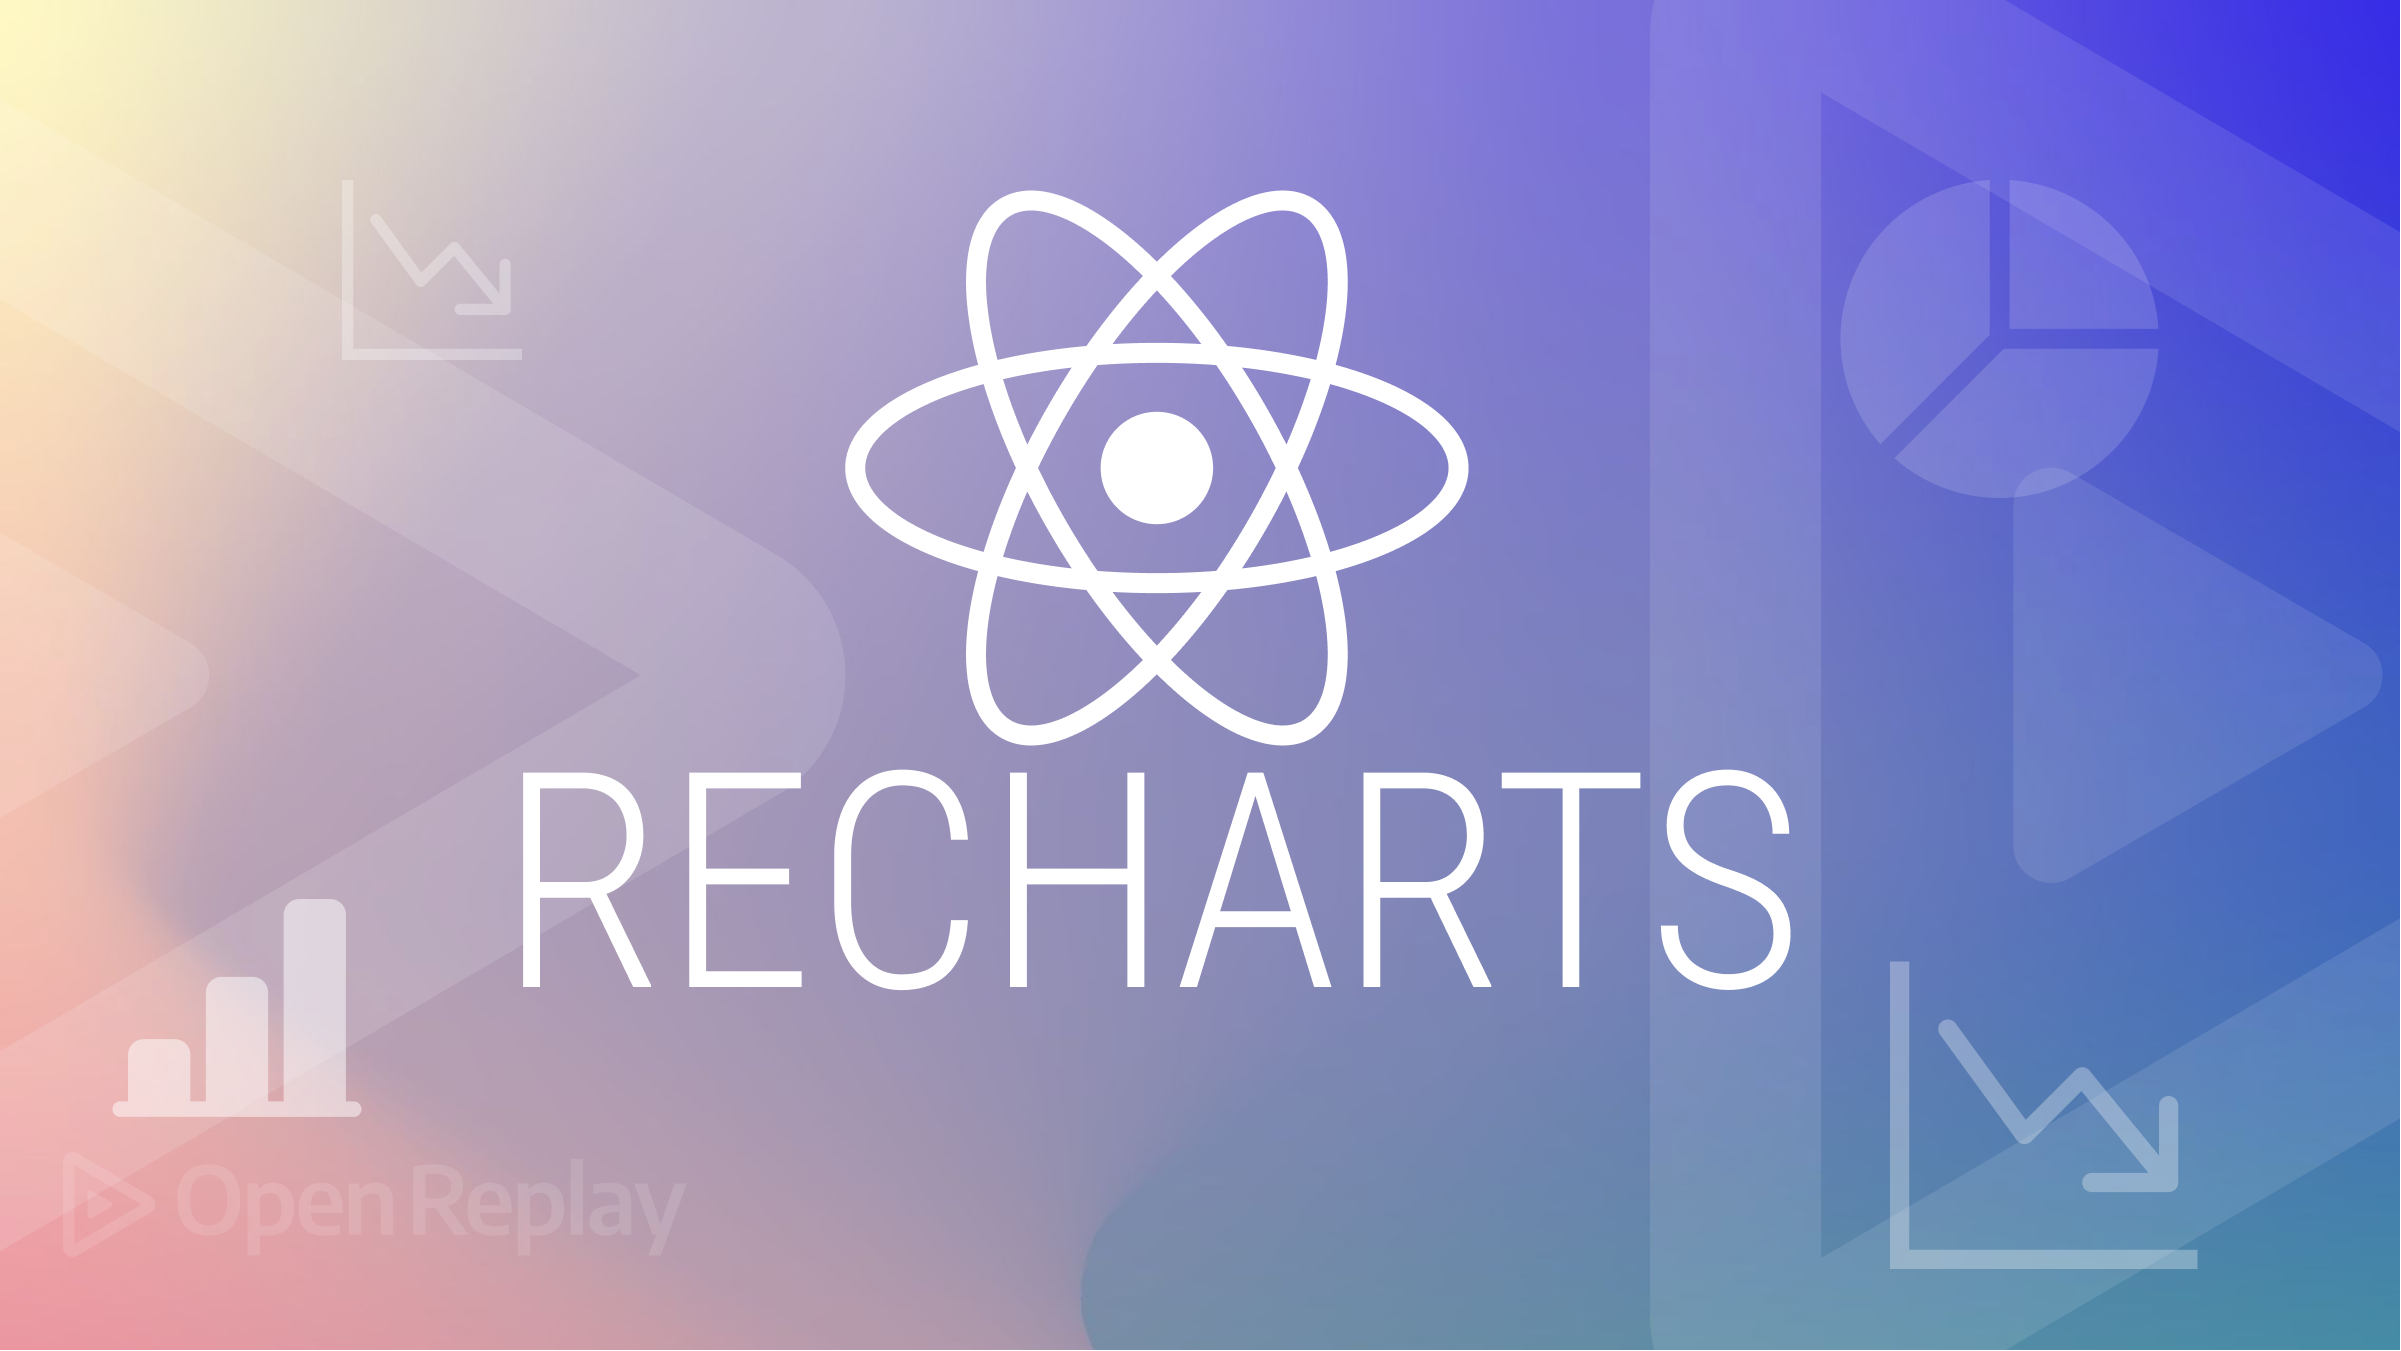 Charting and Graphing in React with Recharts